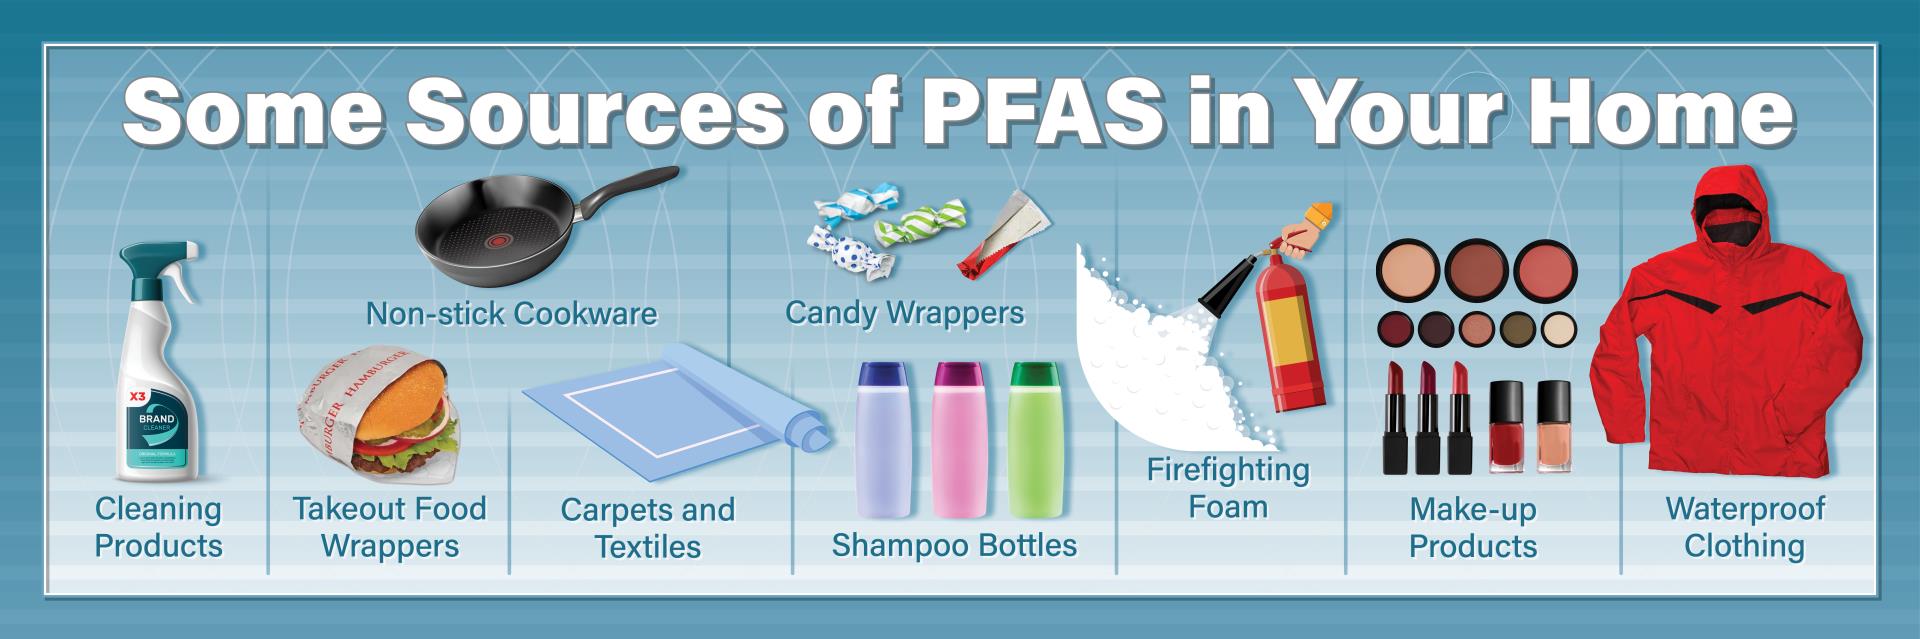 A List of typical items that contain PFAS in households